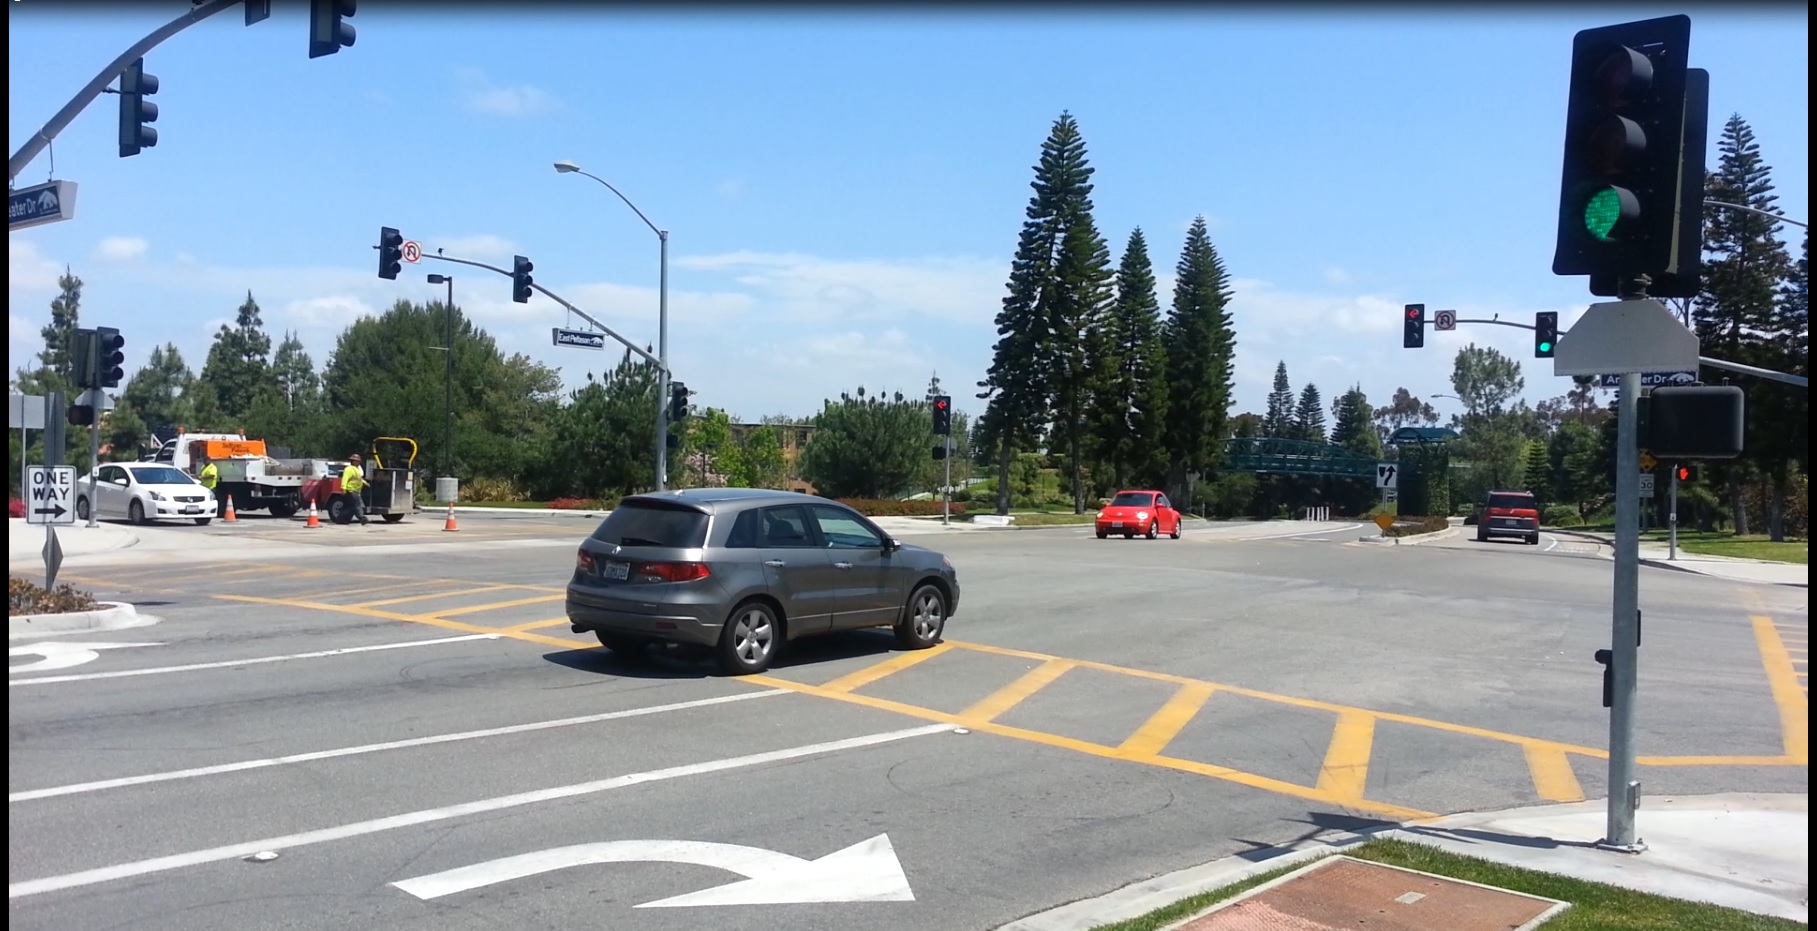 Sample set-up of what to cover. You should be able to see cars as they cross the stop line, as well as the signal